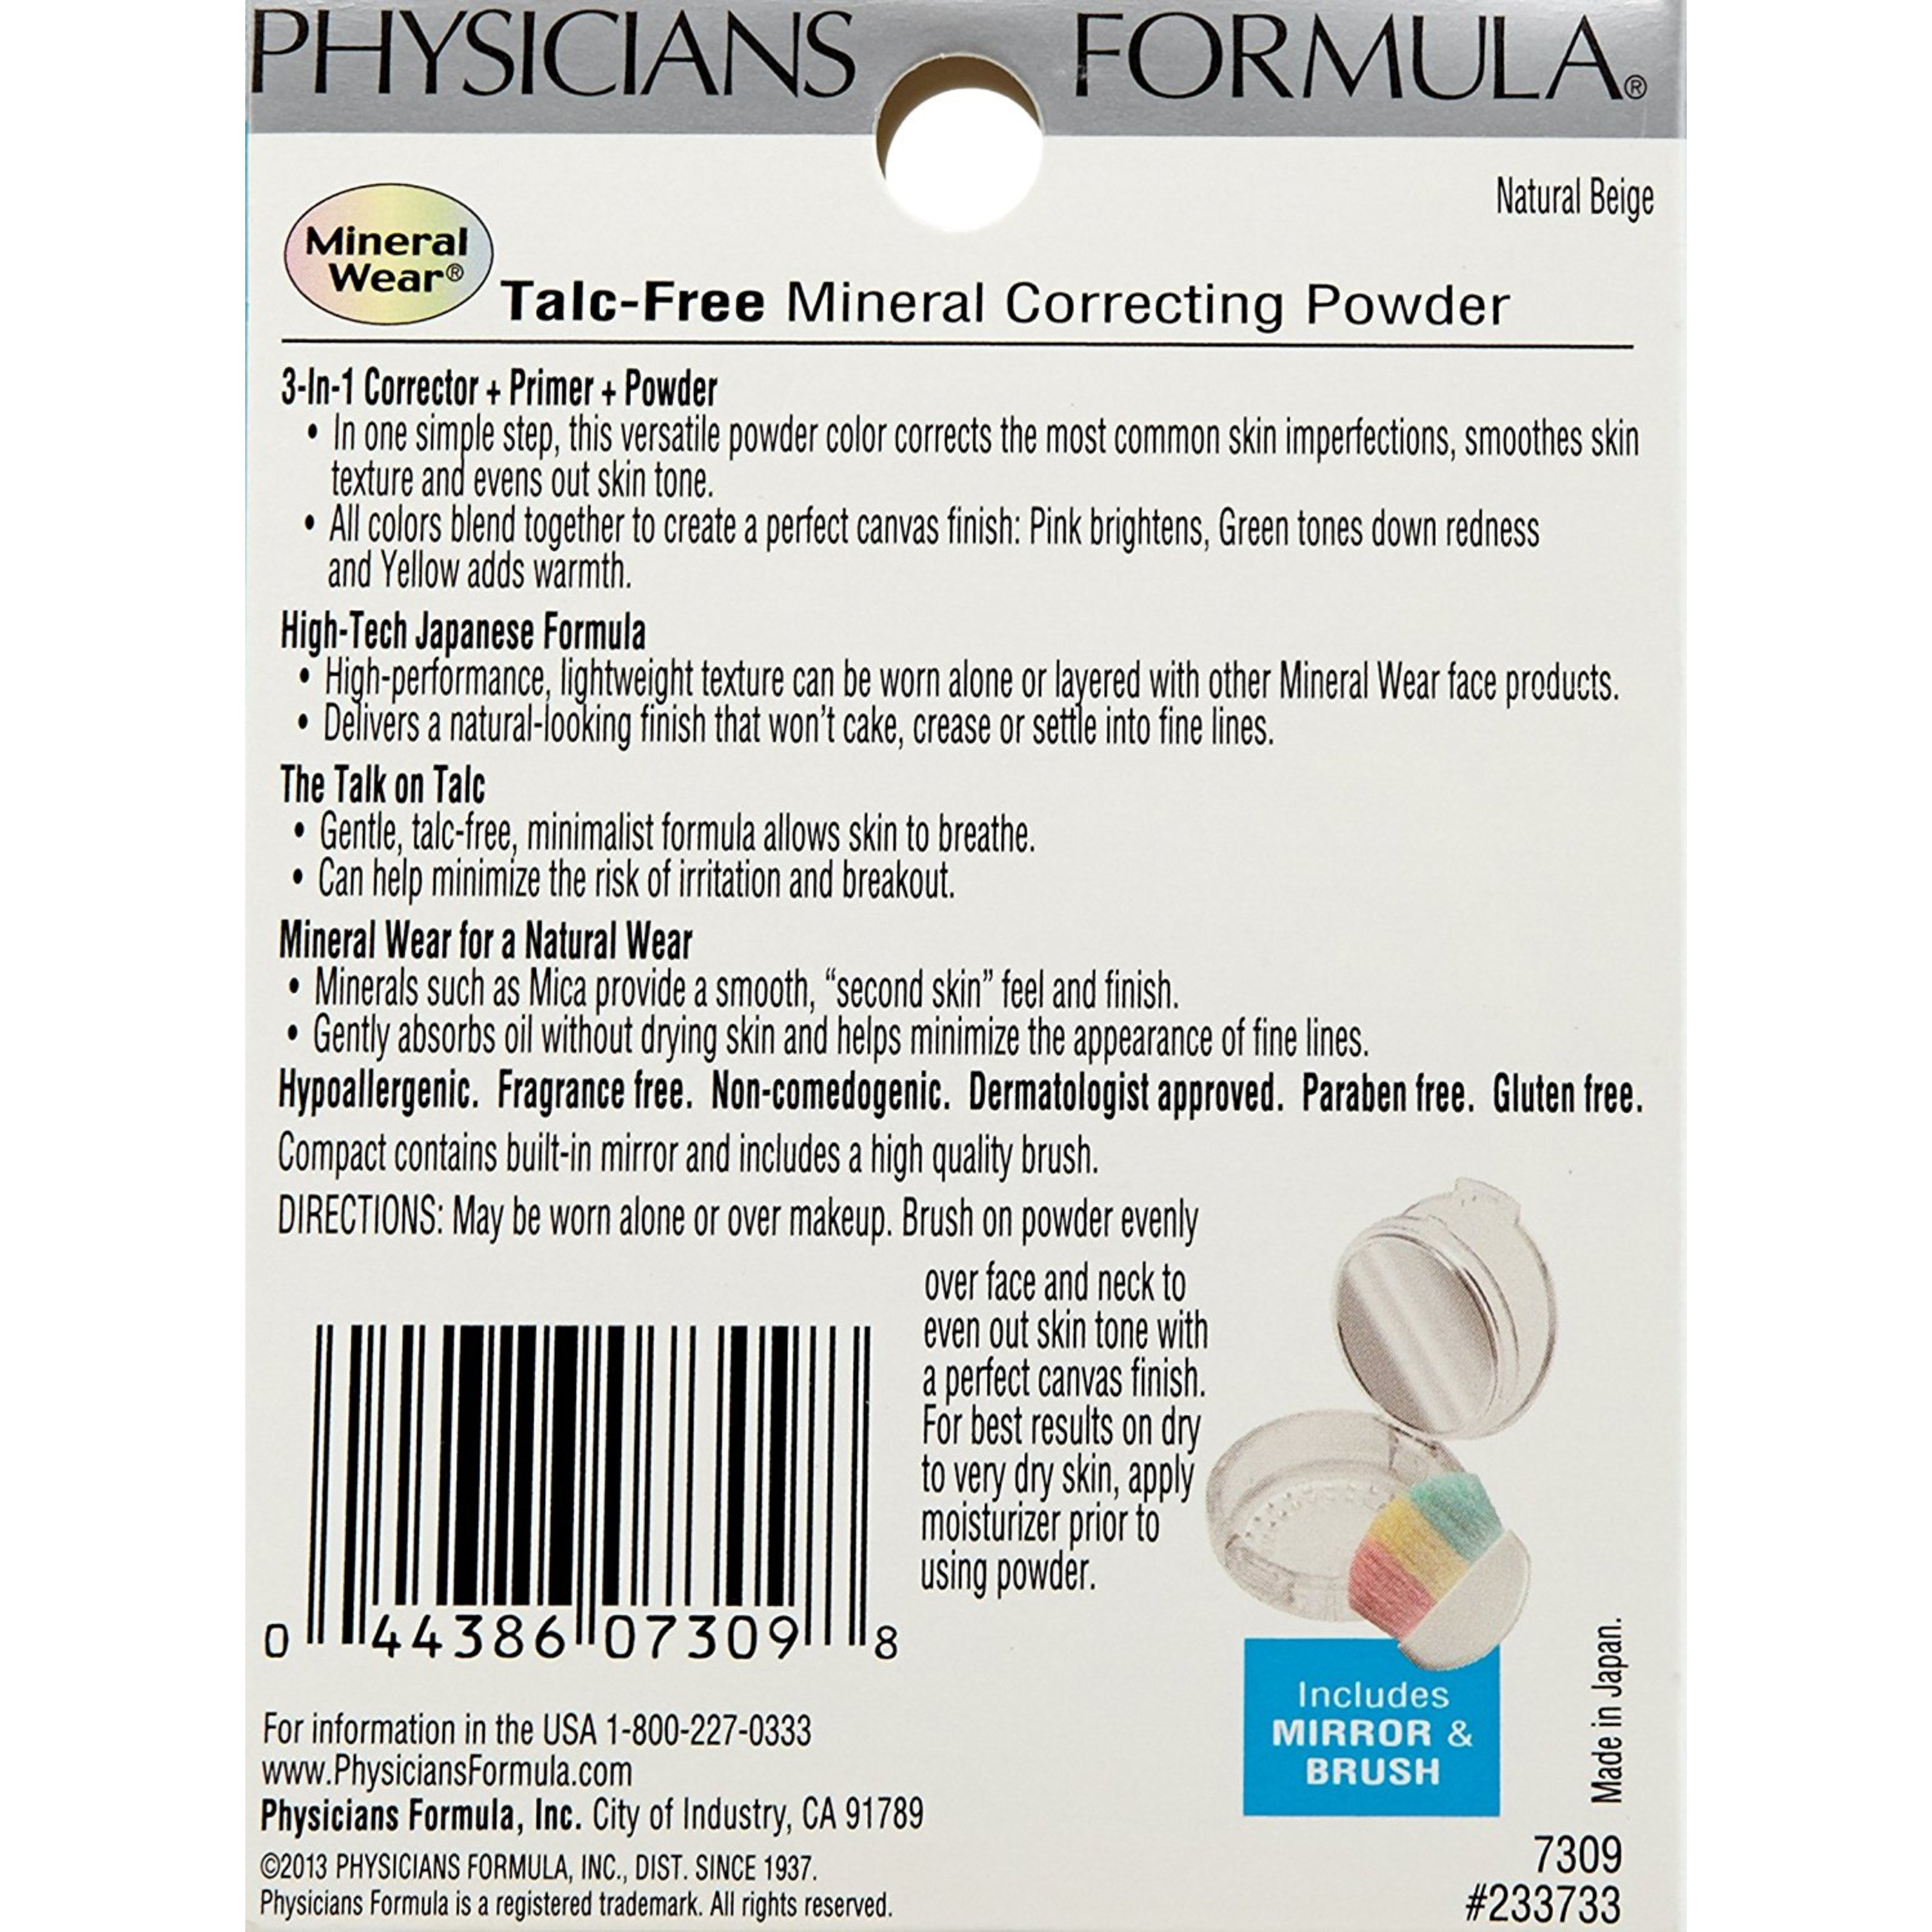 Physicians Formula Mineral Wear® Talc-Free Mineral Correcting Powder, Natural Beige - image 5 of 6